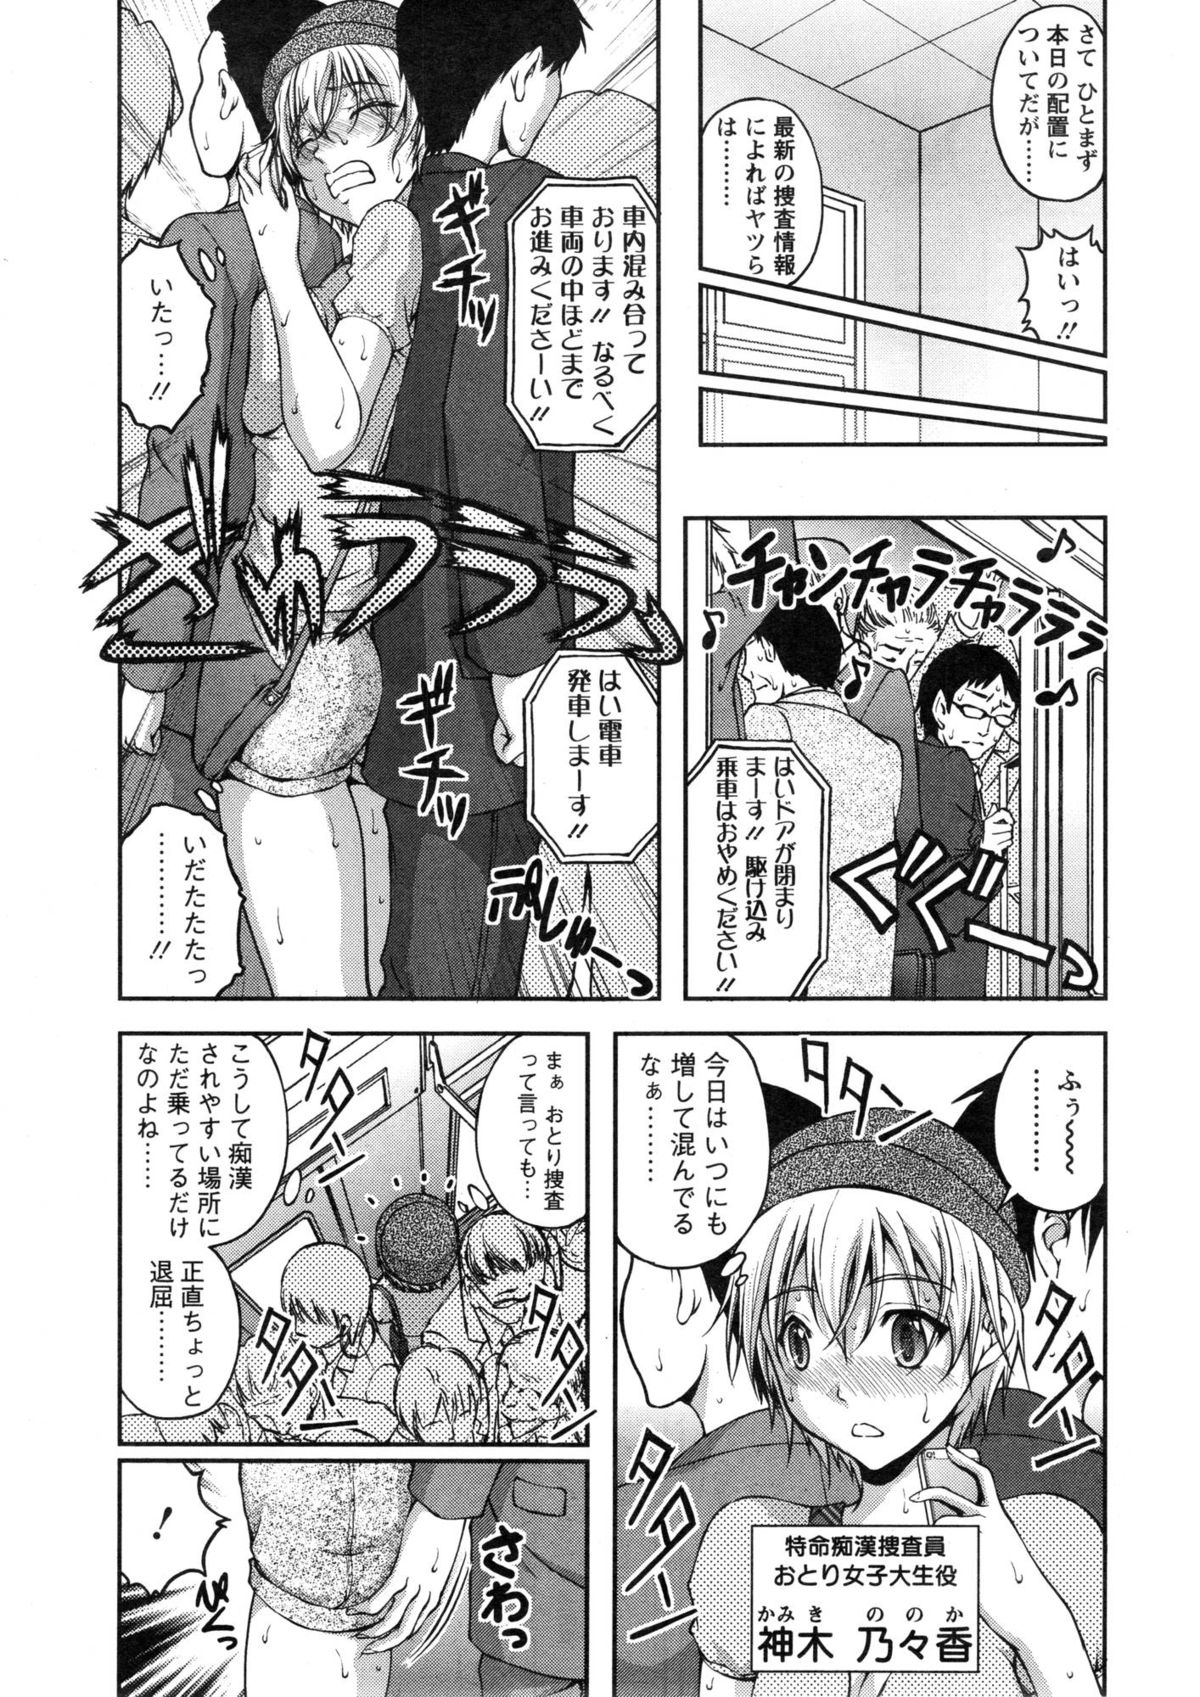 Action Pizazz Special 2015-01 page 11 full